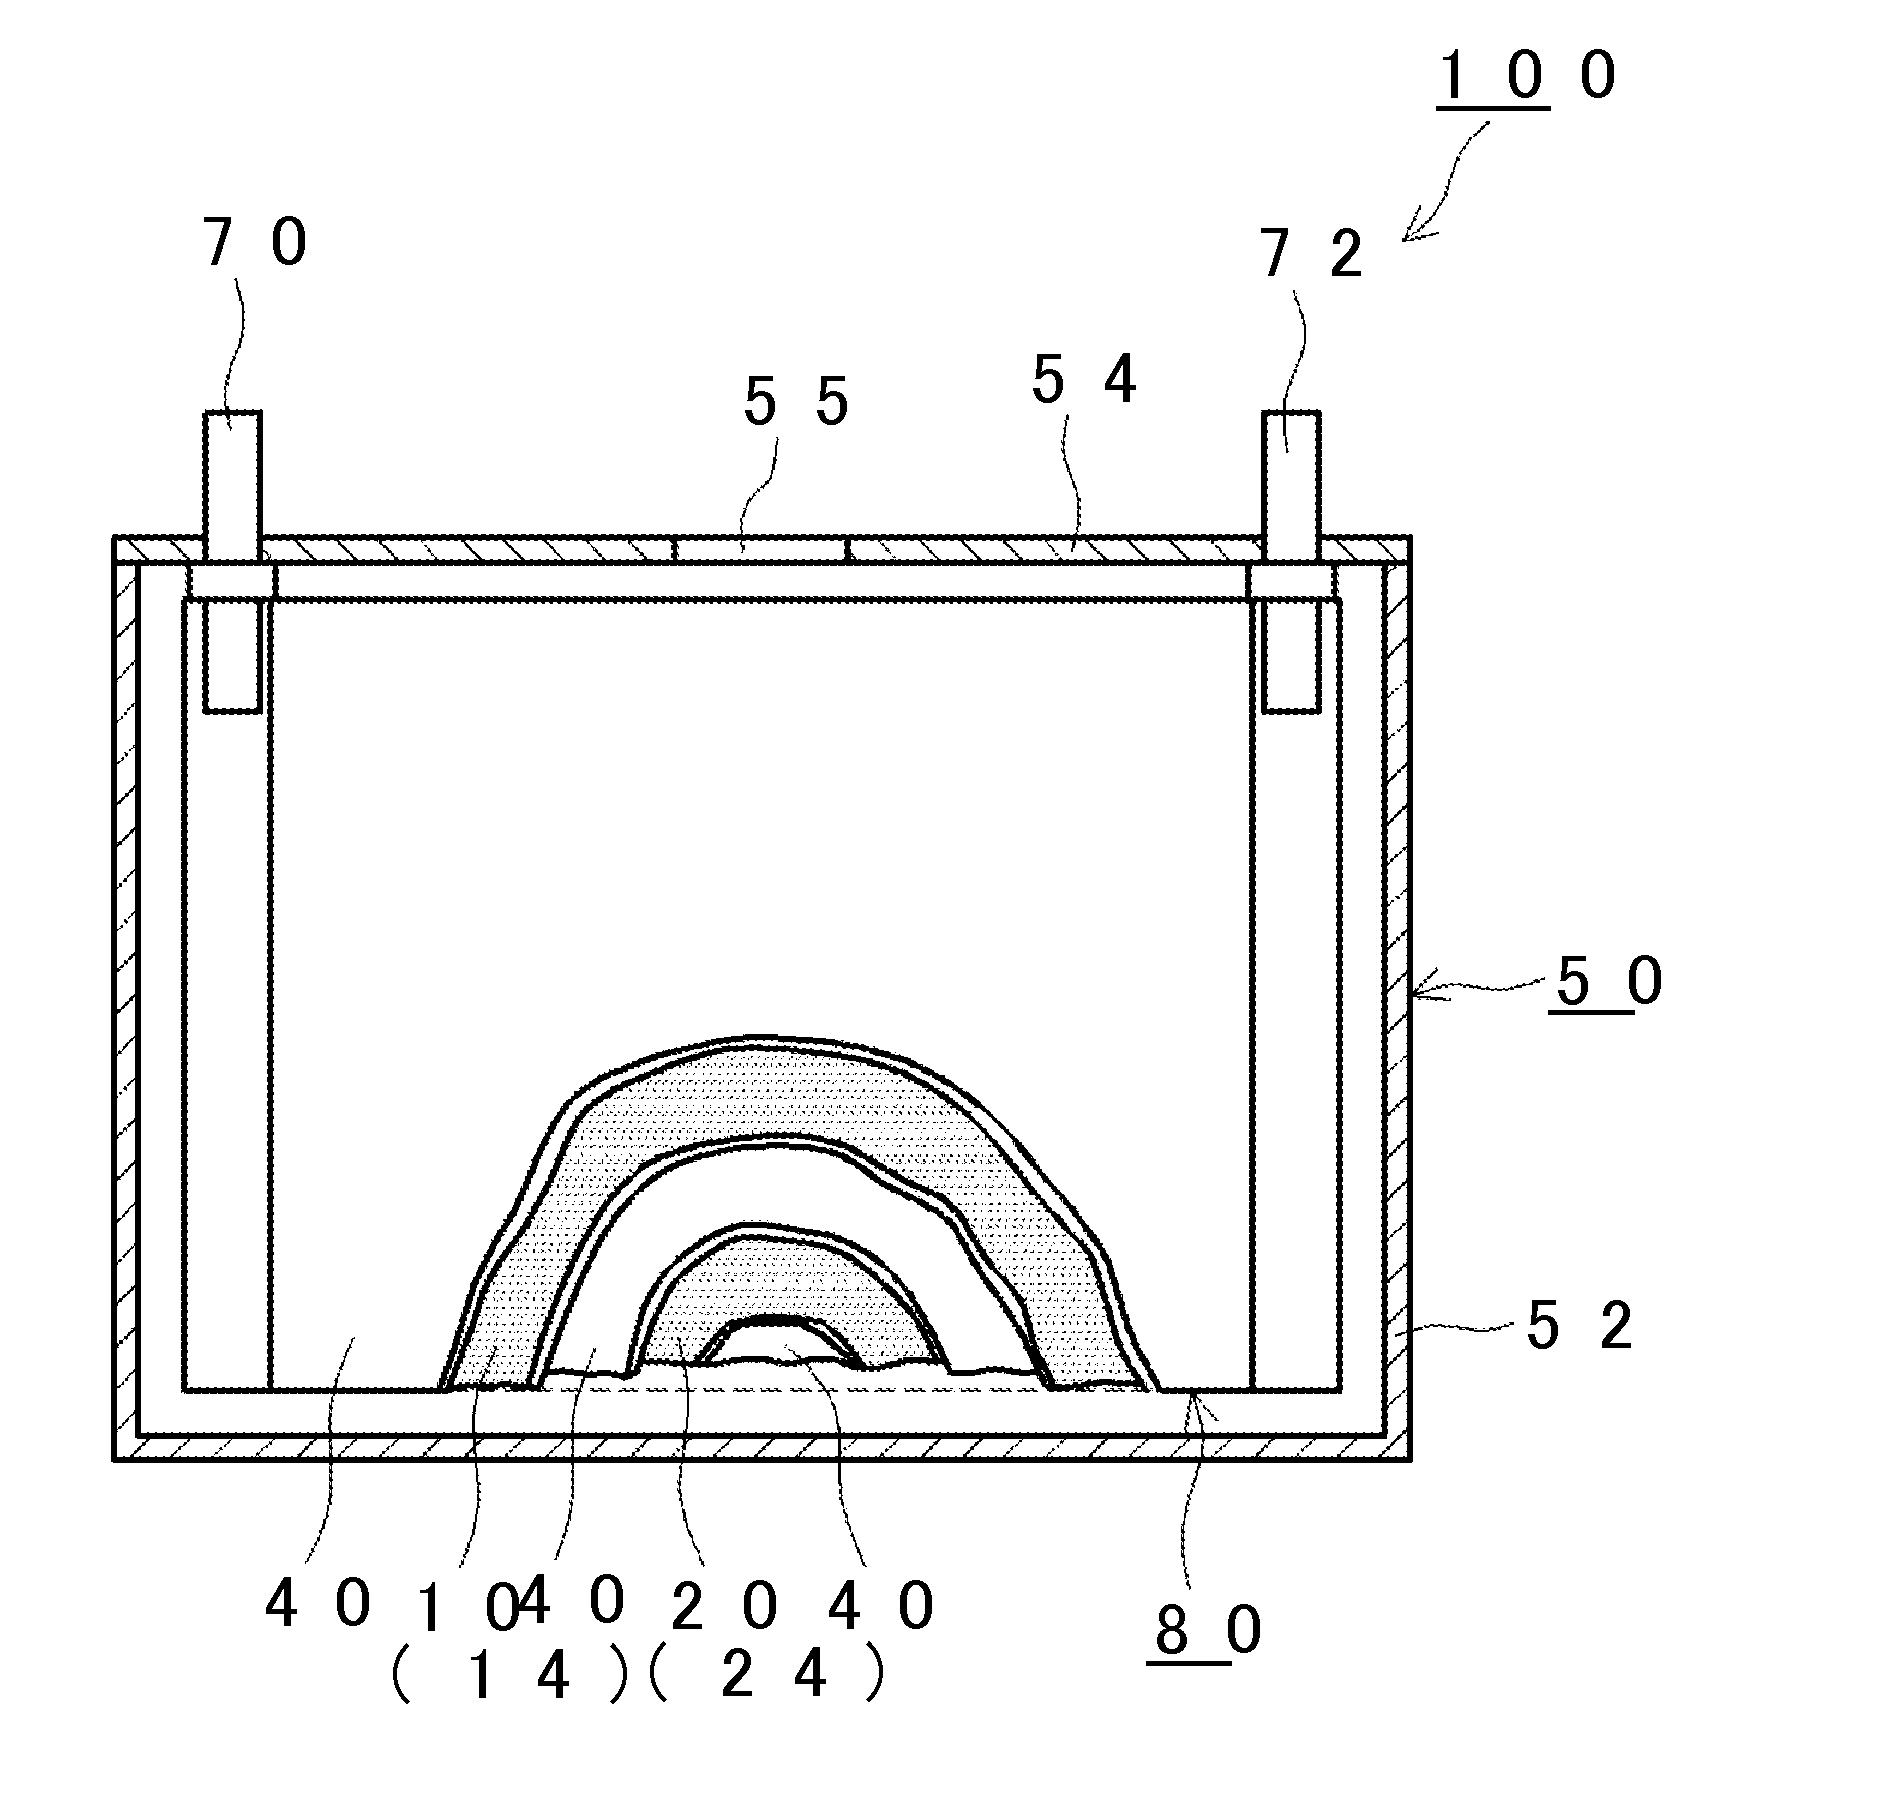 Nonaqueous electrolyte secondary battery, method of manufacturing the same, and nonaqueous electrolytic solution